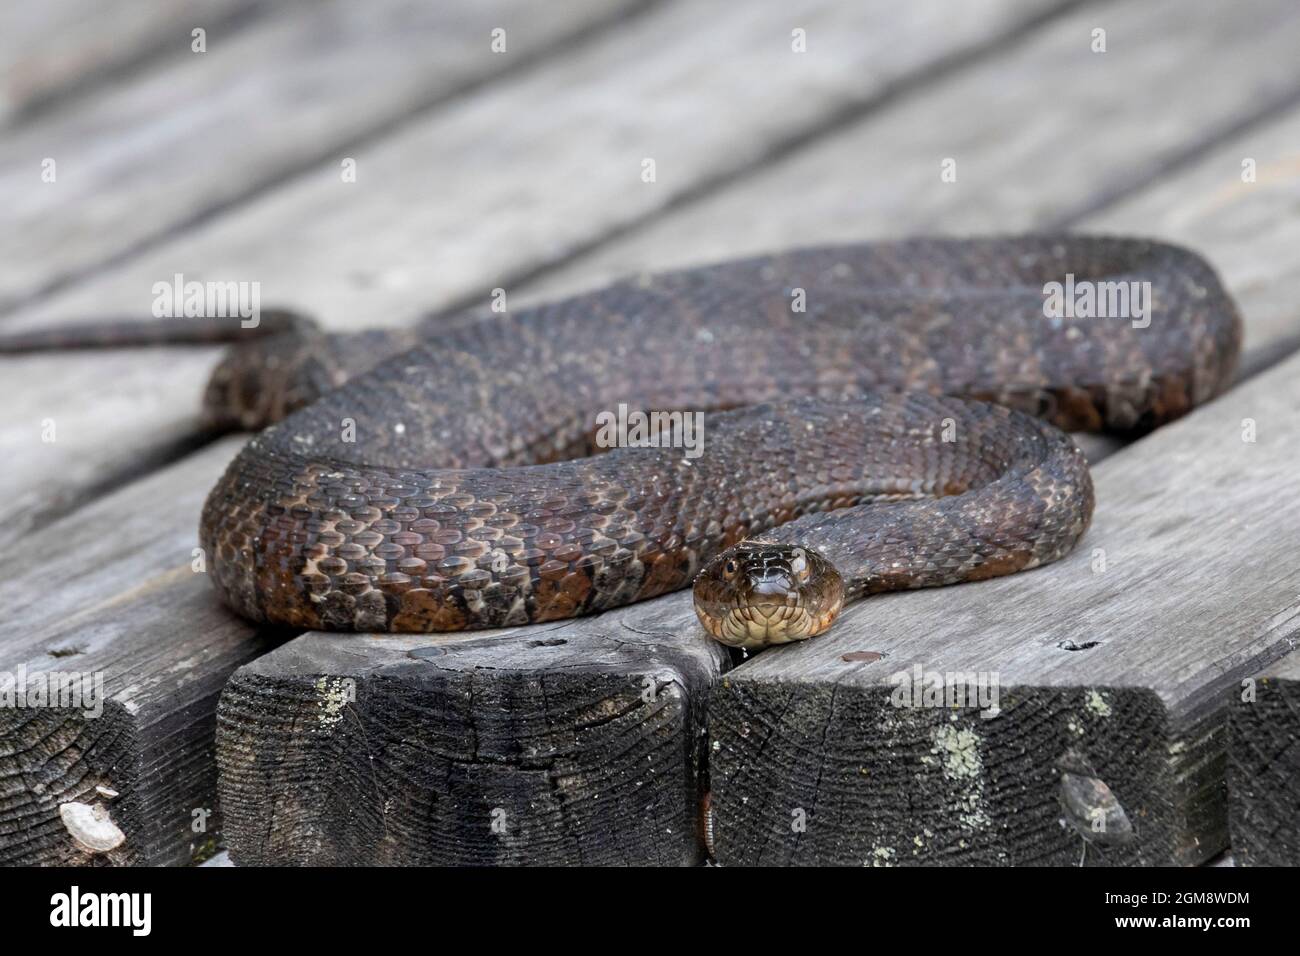 Prairieville, Michigan - A Northern Water Snake (Nerodia sipedon) on a wooden dock on a small west Michigan lake. Stock Photo